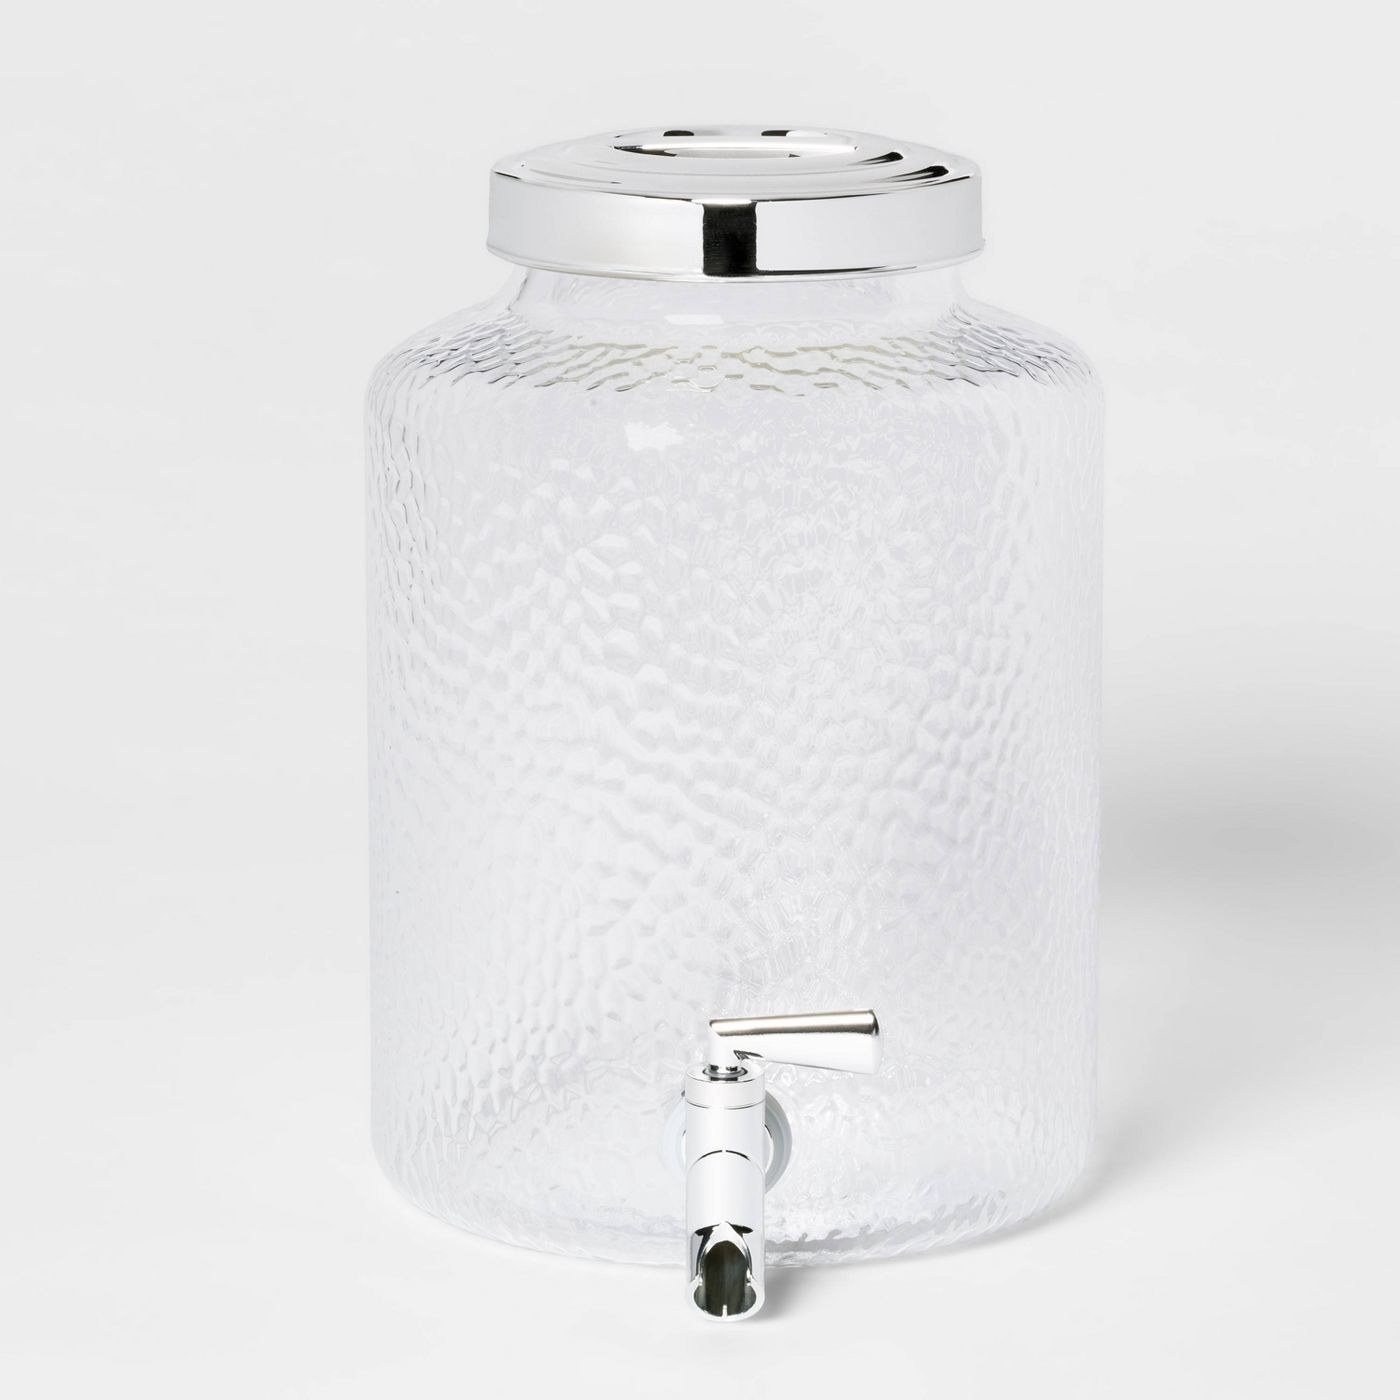 A textured two gallon beverage dispenser with a silver handle to pour out drinks